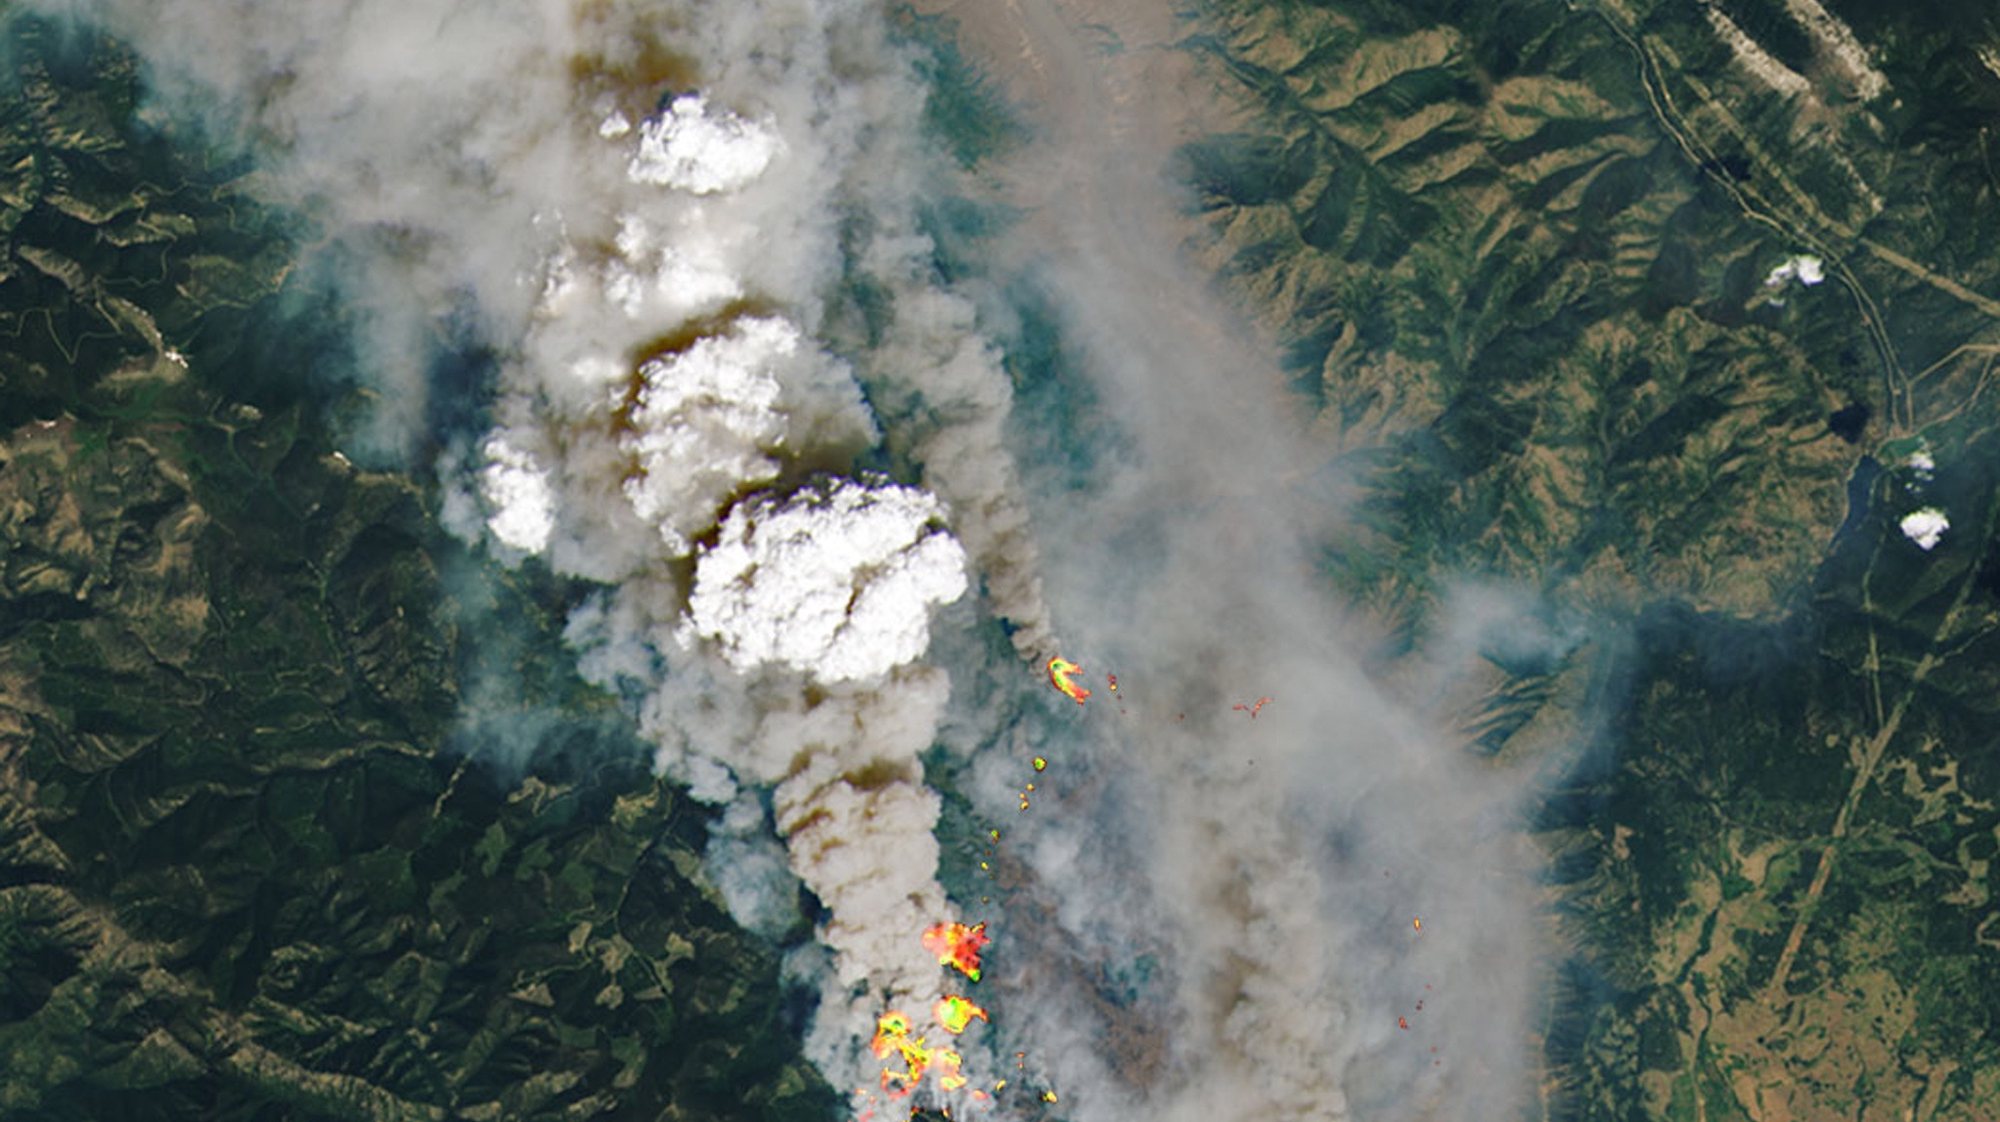 epa09316834 A handout satellite image made available by the National Aeronautics and Space Administration (NASA) shows a detailed view of the McKay Creek fire, some 23km north of the community of Lillooet, British Columbia (BC), Canada, 30 June 2021 (issued 02 July 2021). This natural-color satellite image was overlaid at source with shortwave-infrared light to highlight the active fire. More than 40 wildfires were burning across the Canadian province by the end of June 2021, according to data released by the BC Wildfire Service. A heatwave has hit Canada and north-west USA sending temperatures to dangerous highs.  EPA/NASA HANDOUT  HANDOUT EDITORIAL USE ONLY/NO SALES